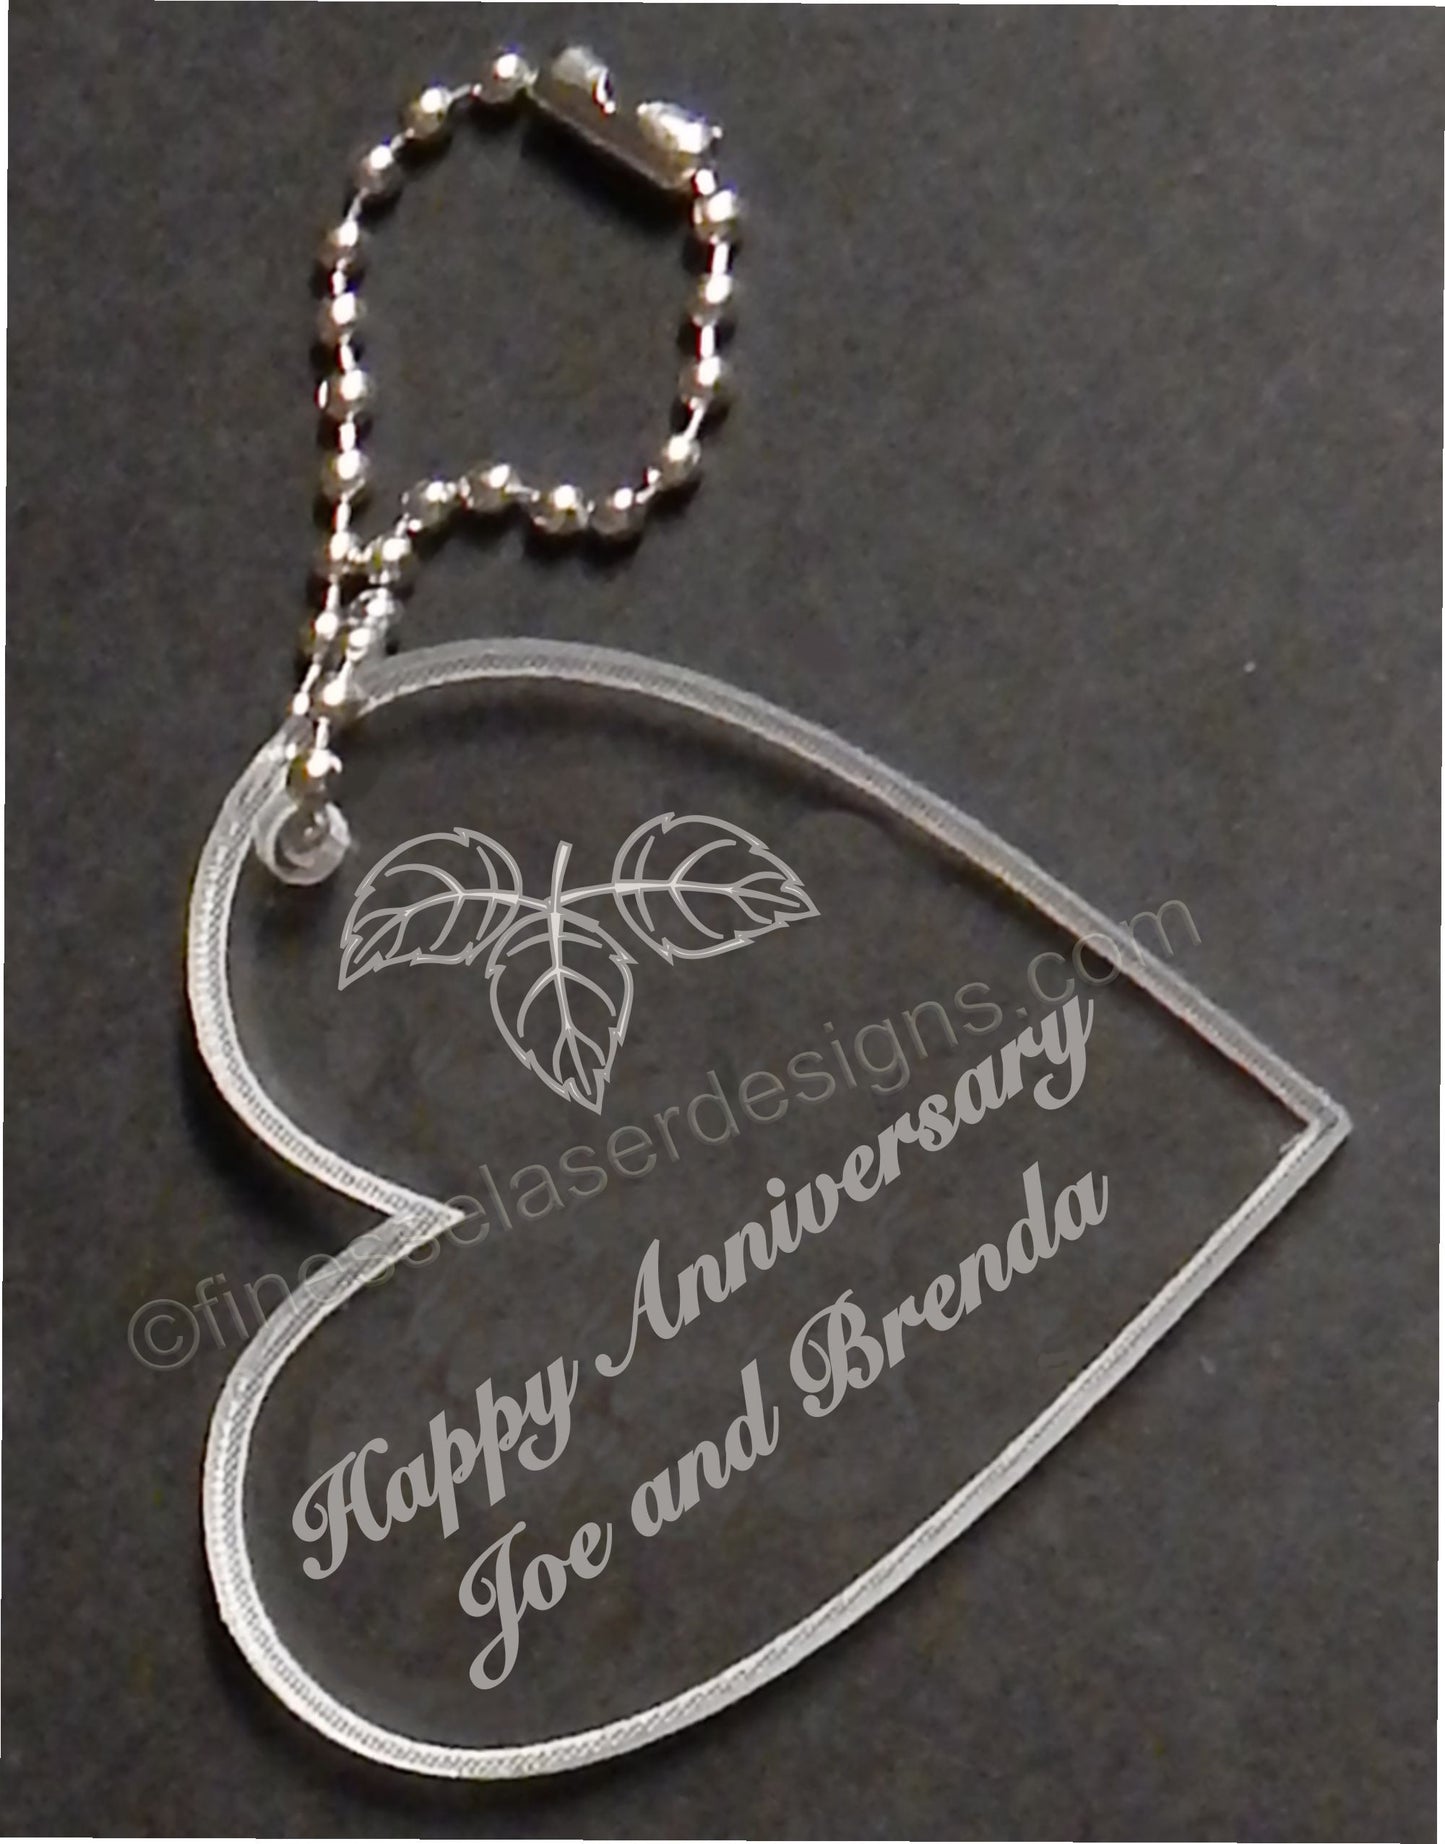 heart shaped keychain favor designed with fall leaves and engraved with Happy Anniversary and names, with small metal chain attached